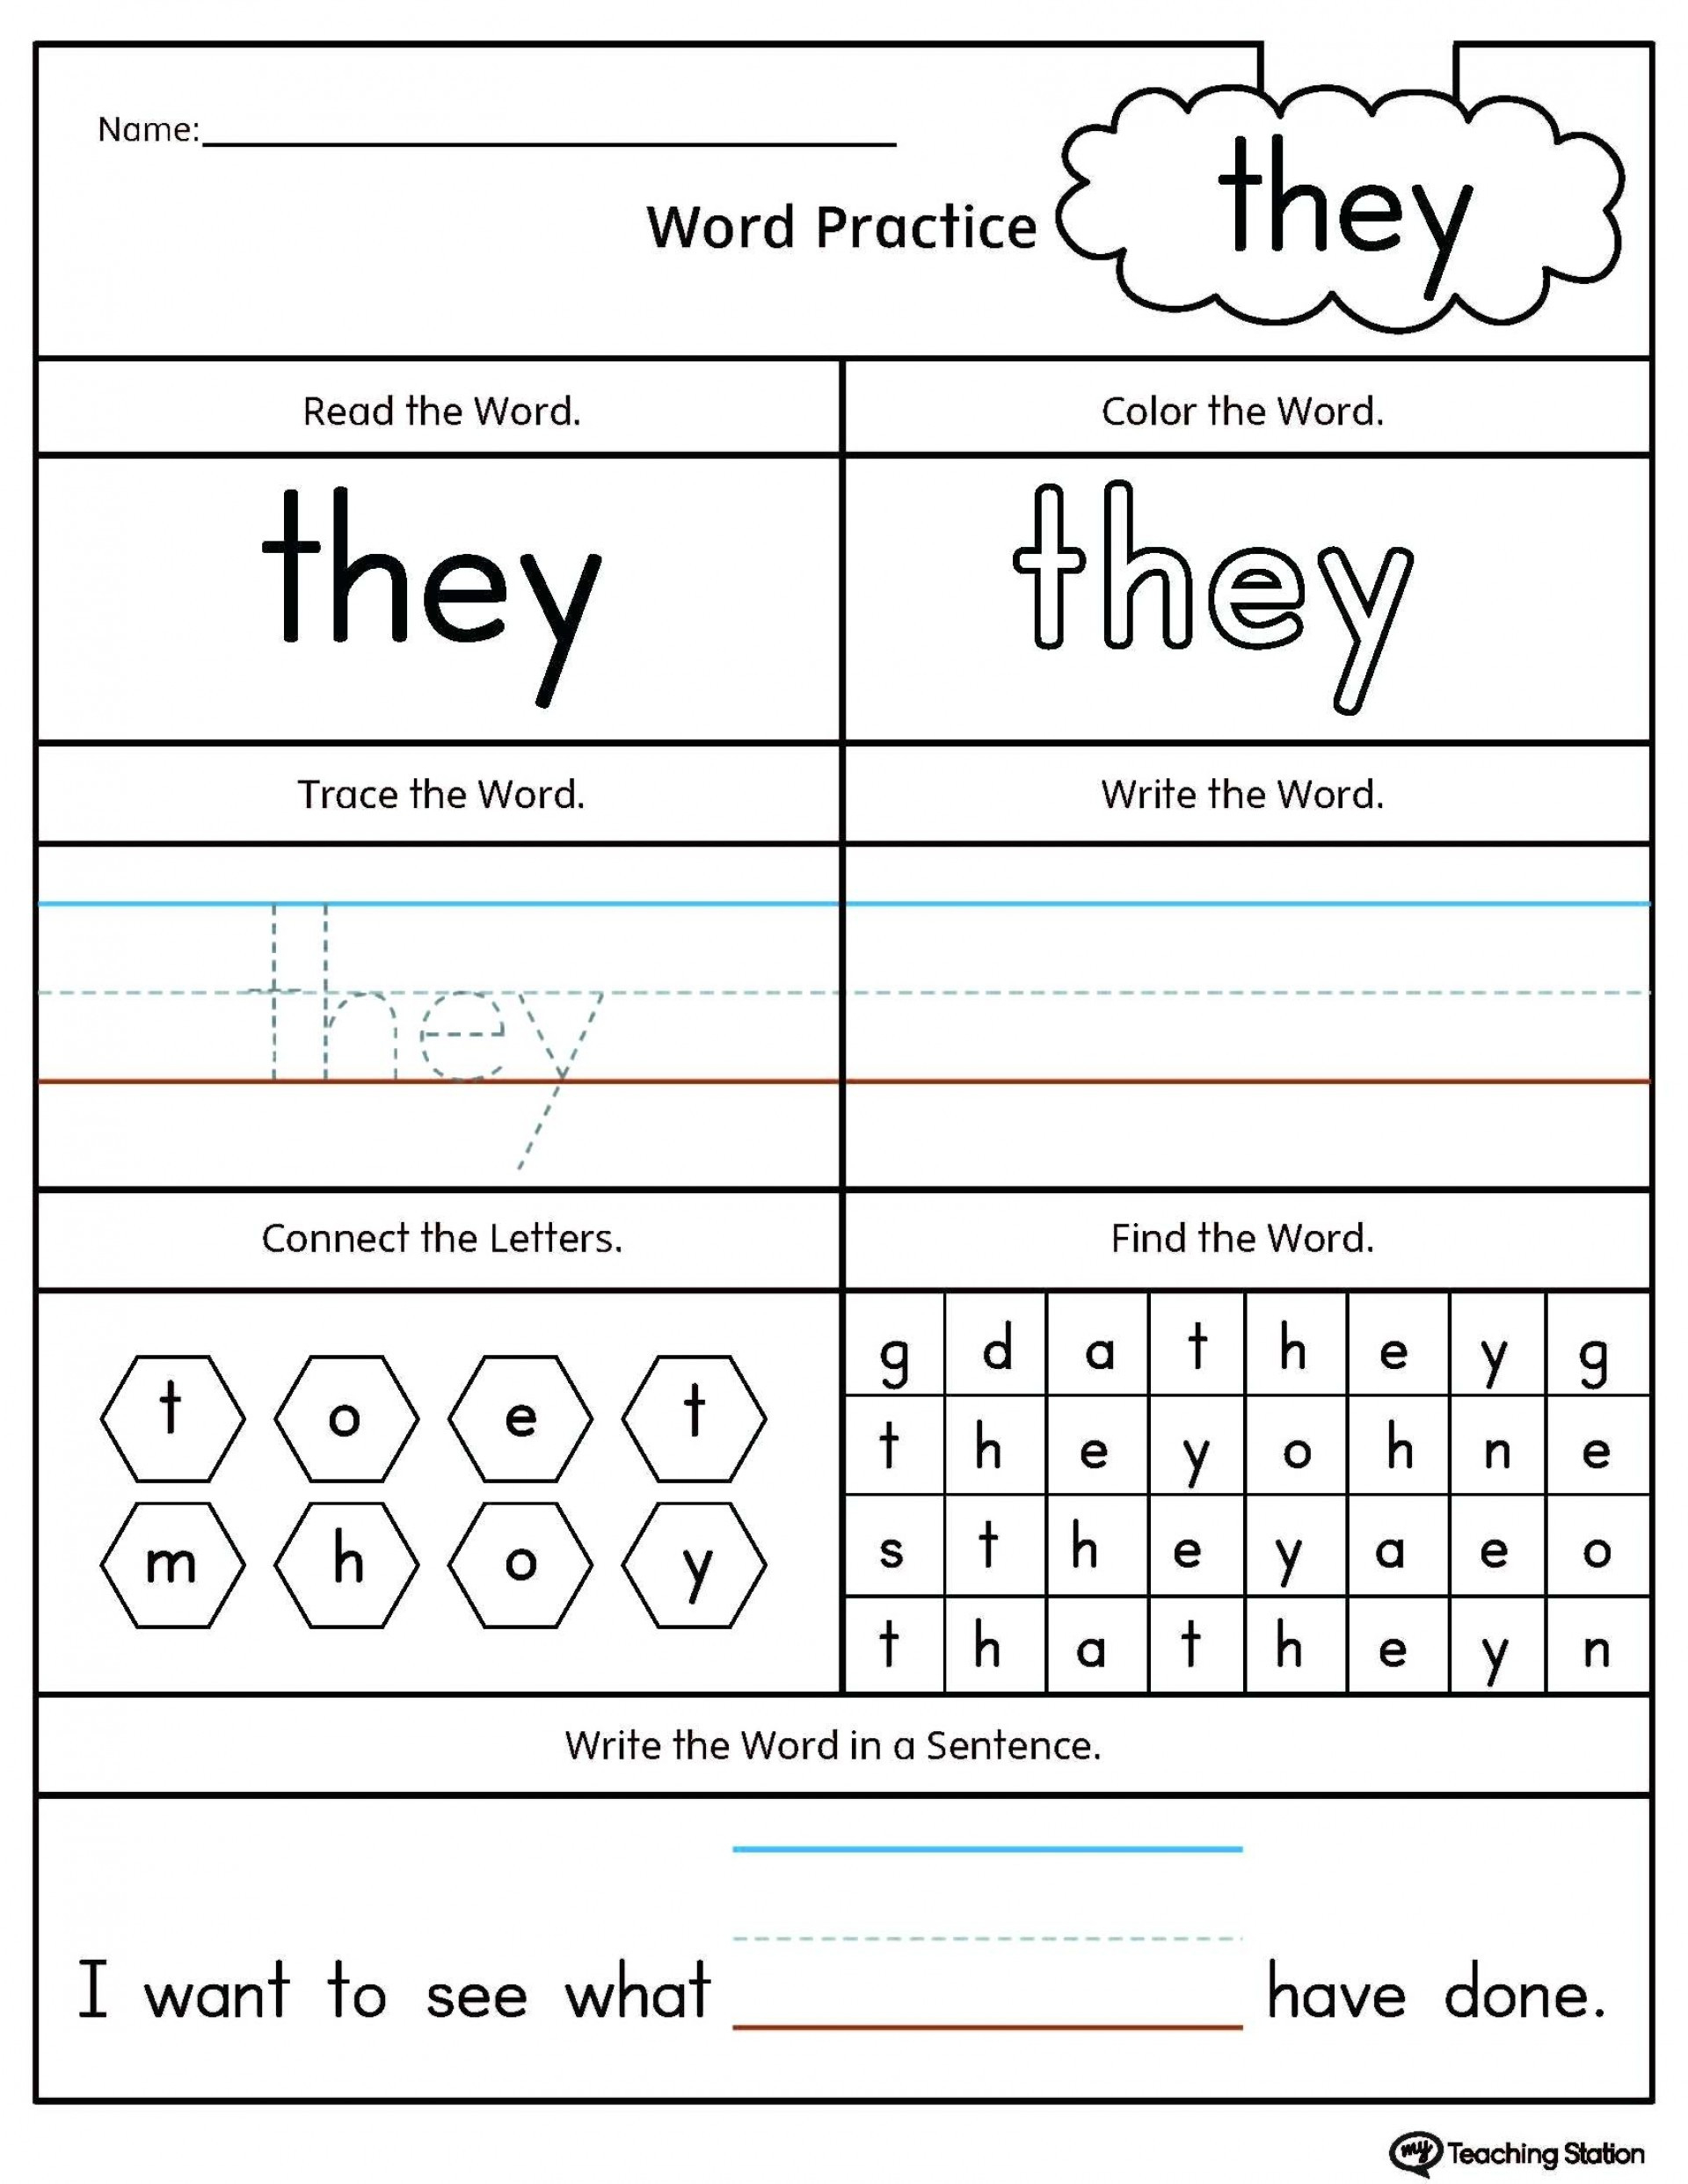 dolch-sight-words-worksheets-db-excel